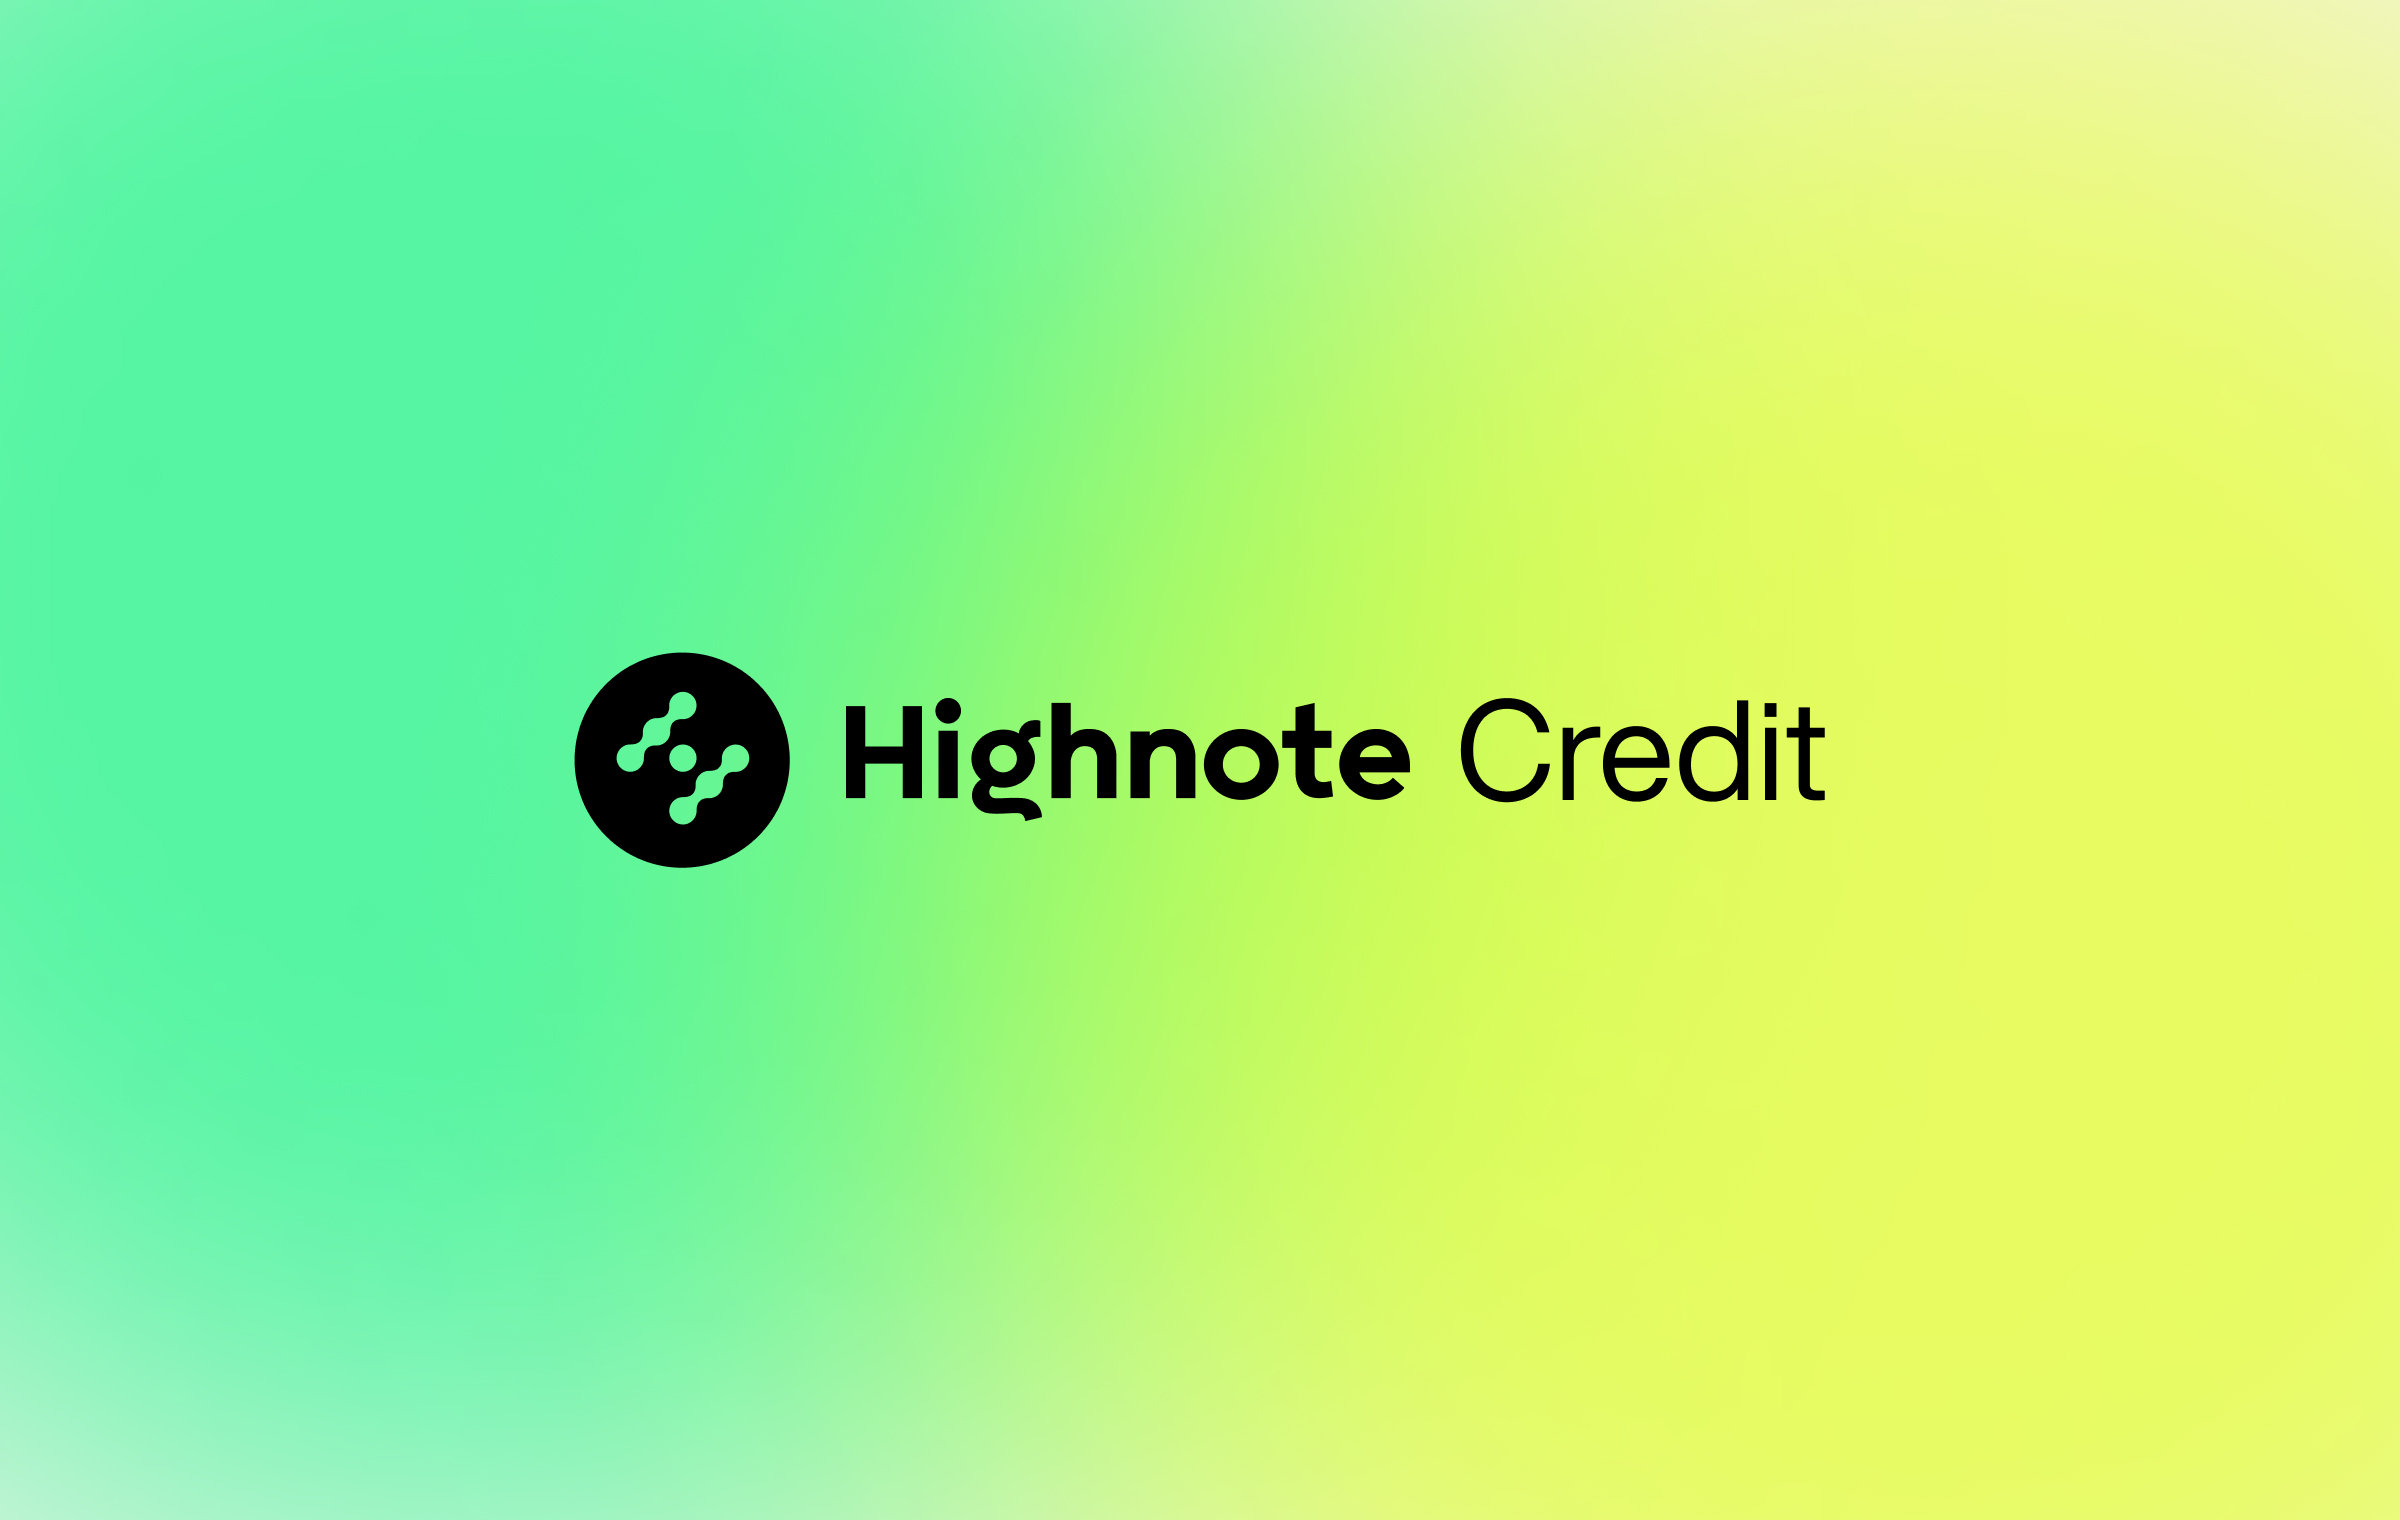 This image shows the Highnote logo on a green background that gradually transforms to yellow. The word "Credit" is next to the Highnote logo. 